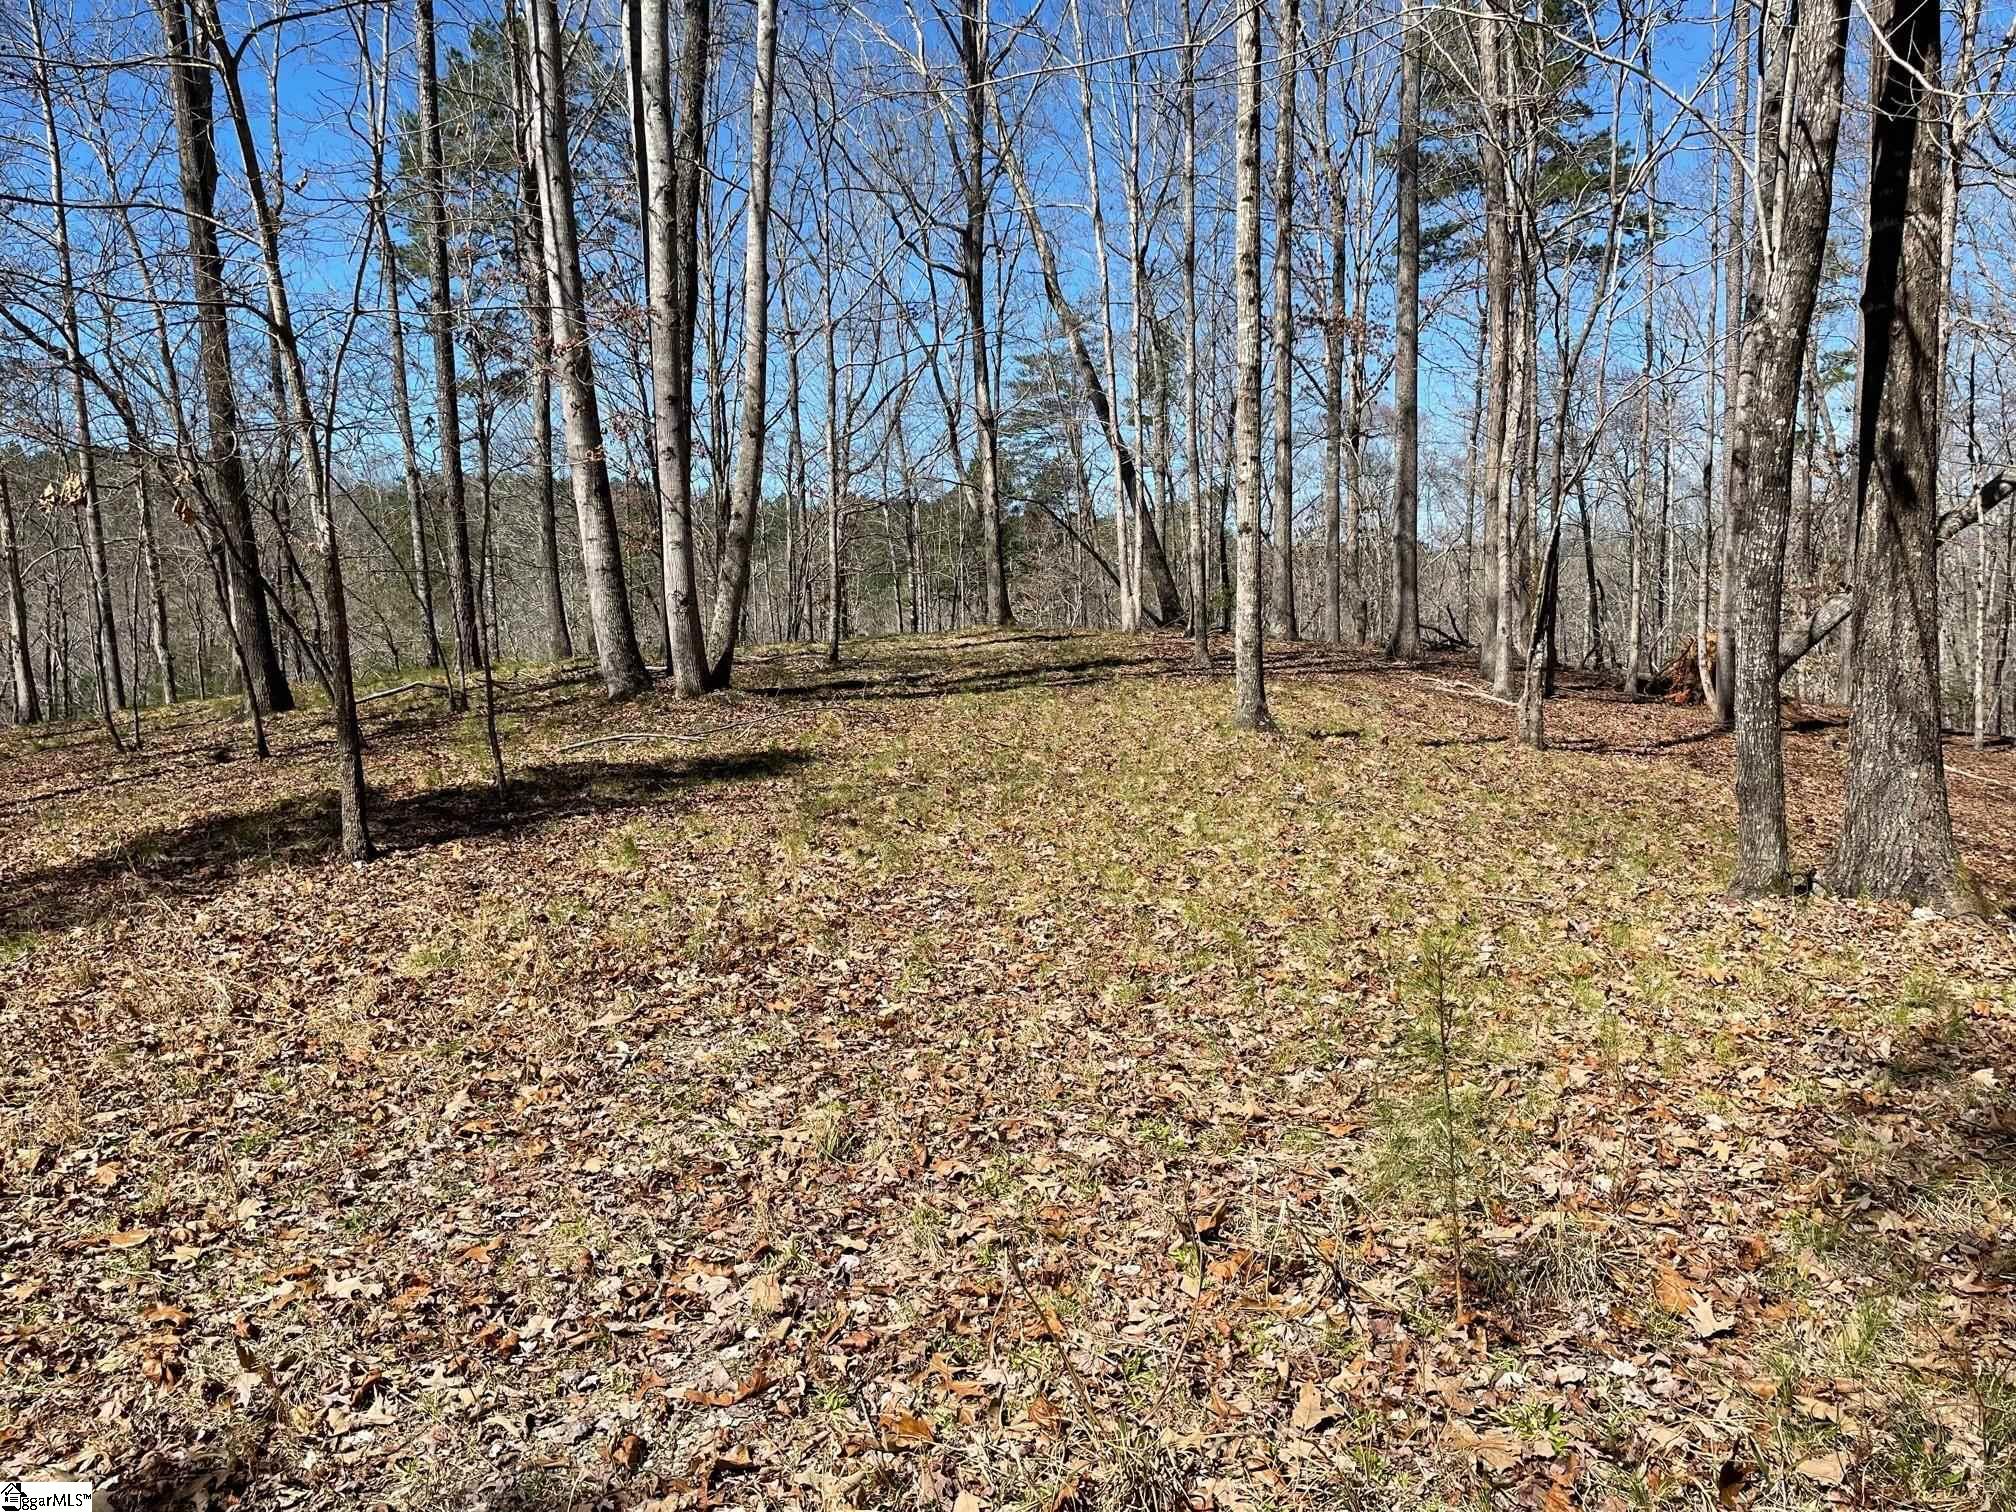 Private estate lot with an idyllic setting for the buyer seeking natural surroundings, a low cost easy to build site and close proximity to amenities.   Featuring an elevated flat building site, this hardwood campus with natural mountain laurel is bordered at the rear by a mountain stream and affords some seasonal long range lake and mountain views.  Located just 3/10s of a mile inside the main gate providing easy access to all community amenities and quick access and egress to nearby towns of Clemson and Pickens (15 minutes). A Cliffs Membership is available for additional purchase.